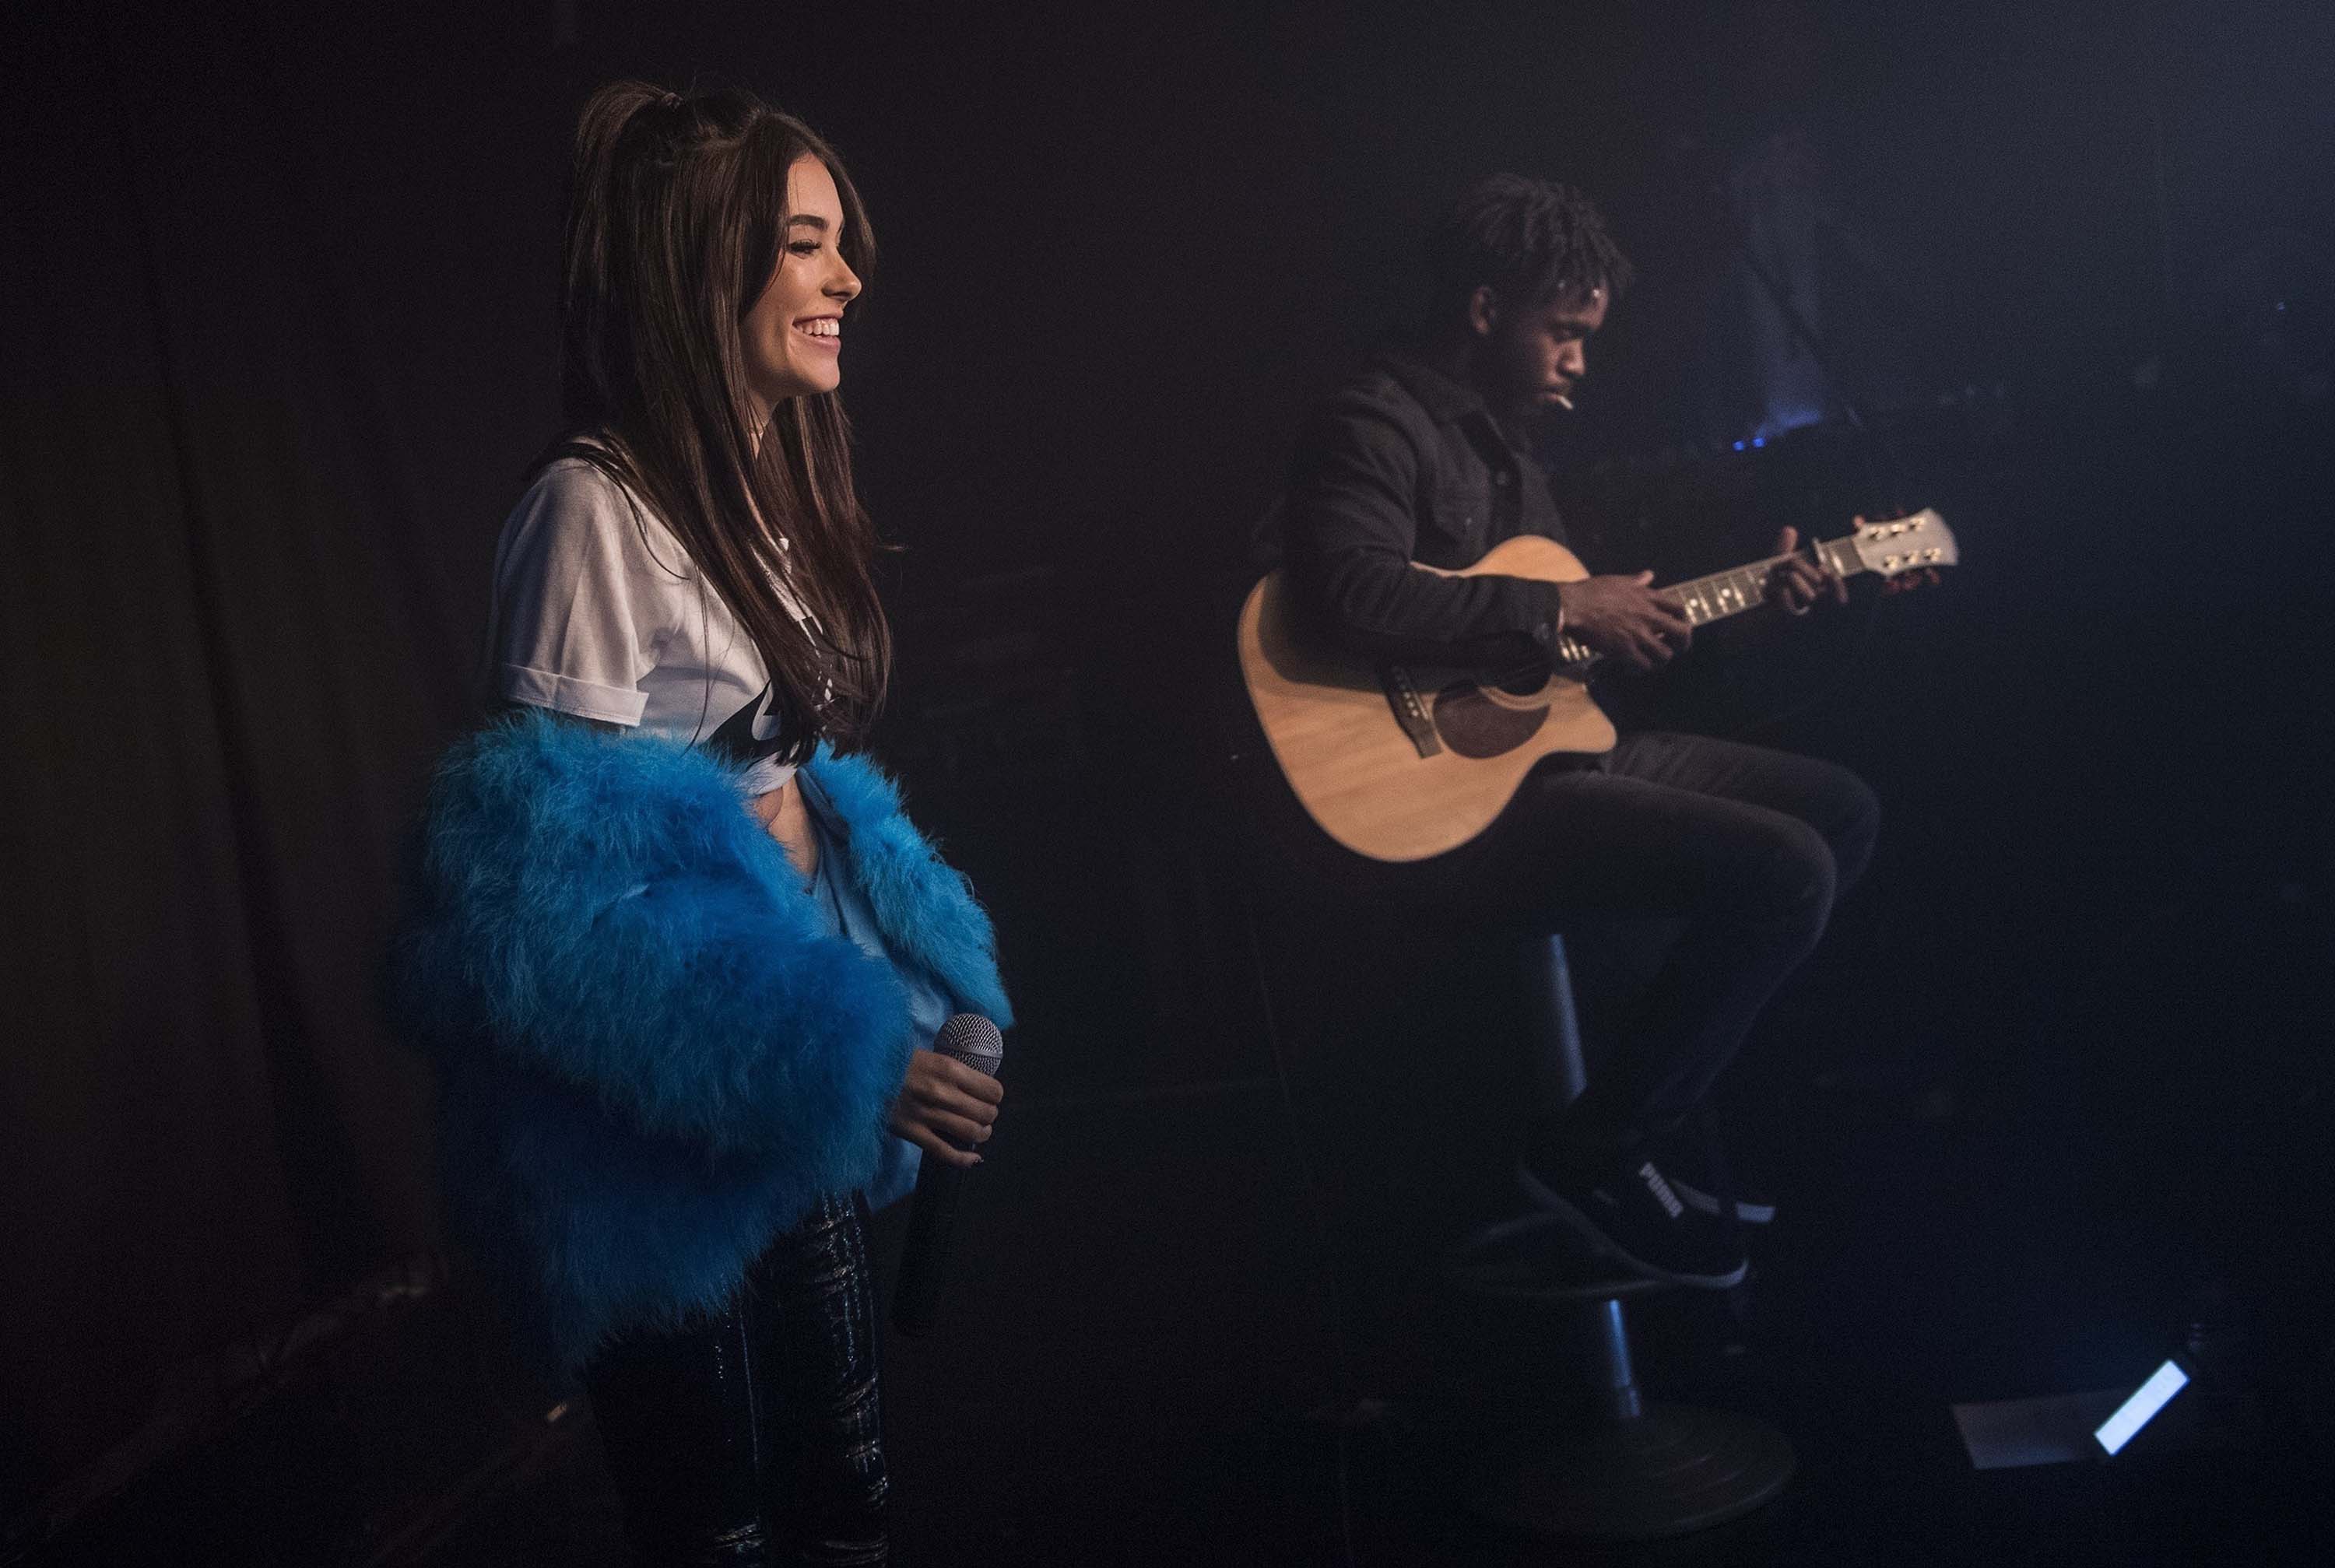 Madison Beer performs at the Hoxton Square Bar & Kitchen